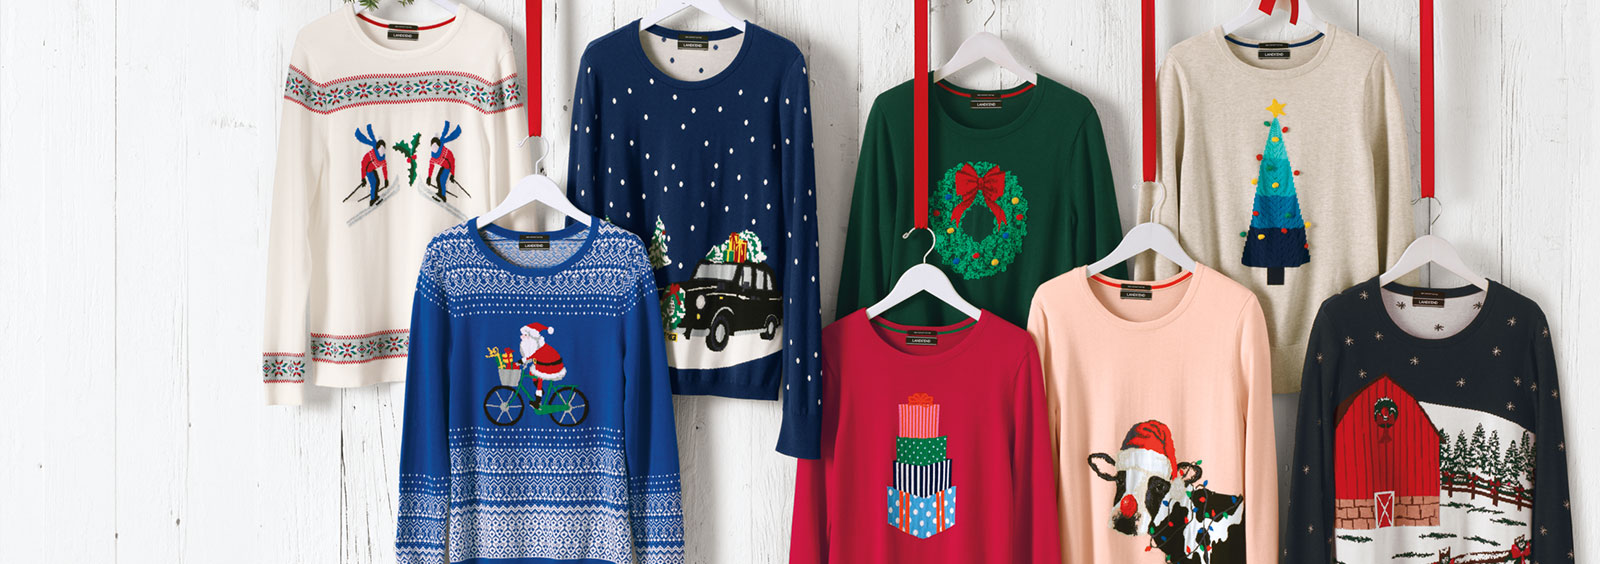 Christmas Sweaters - How To Wear At Work